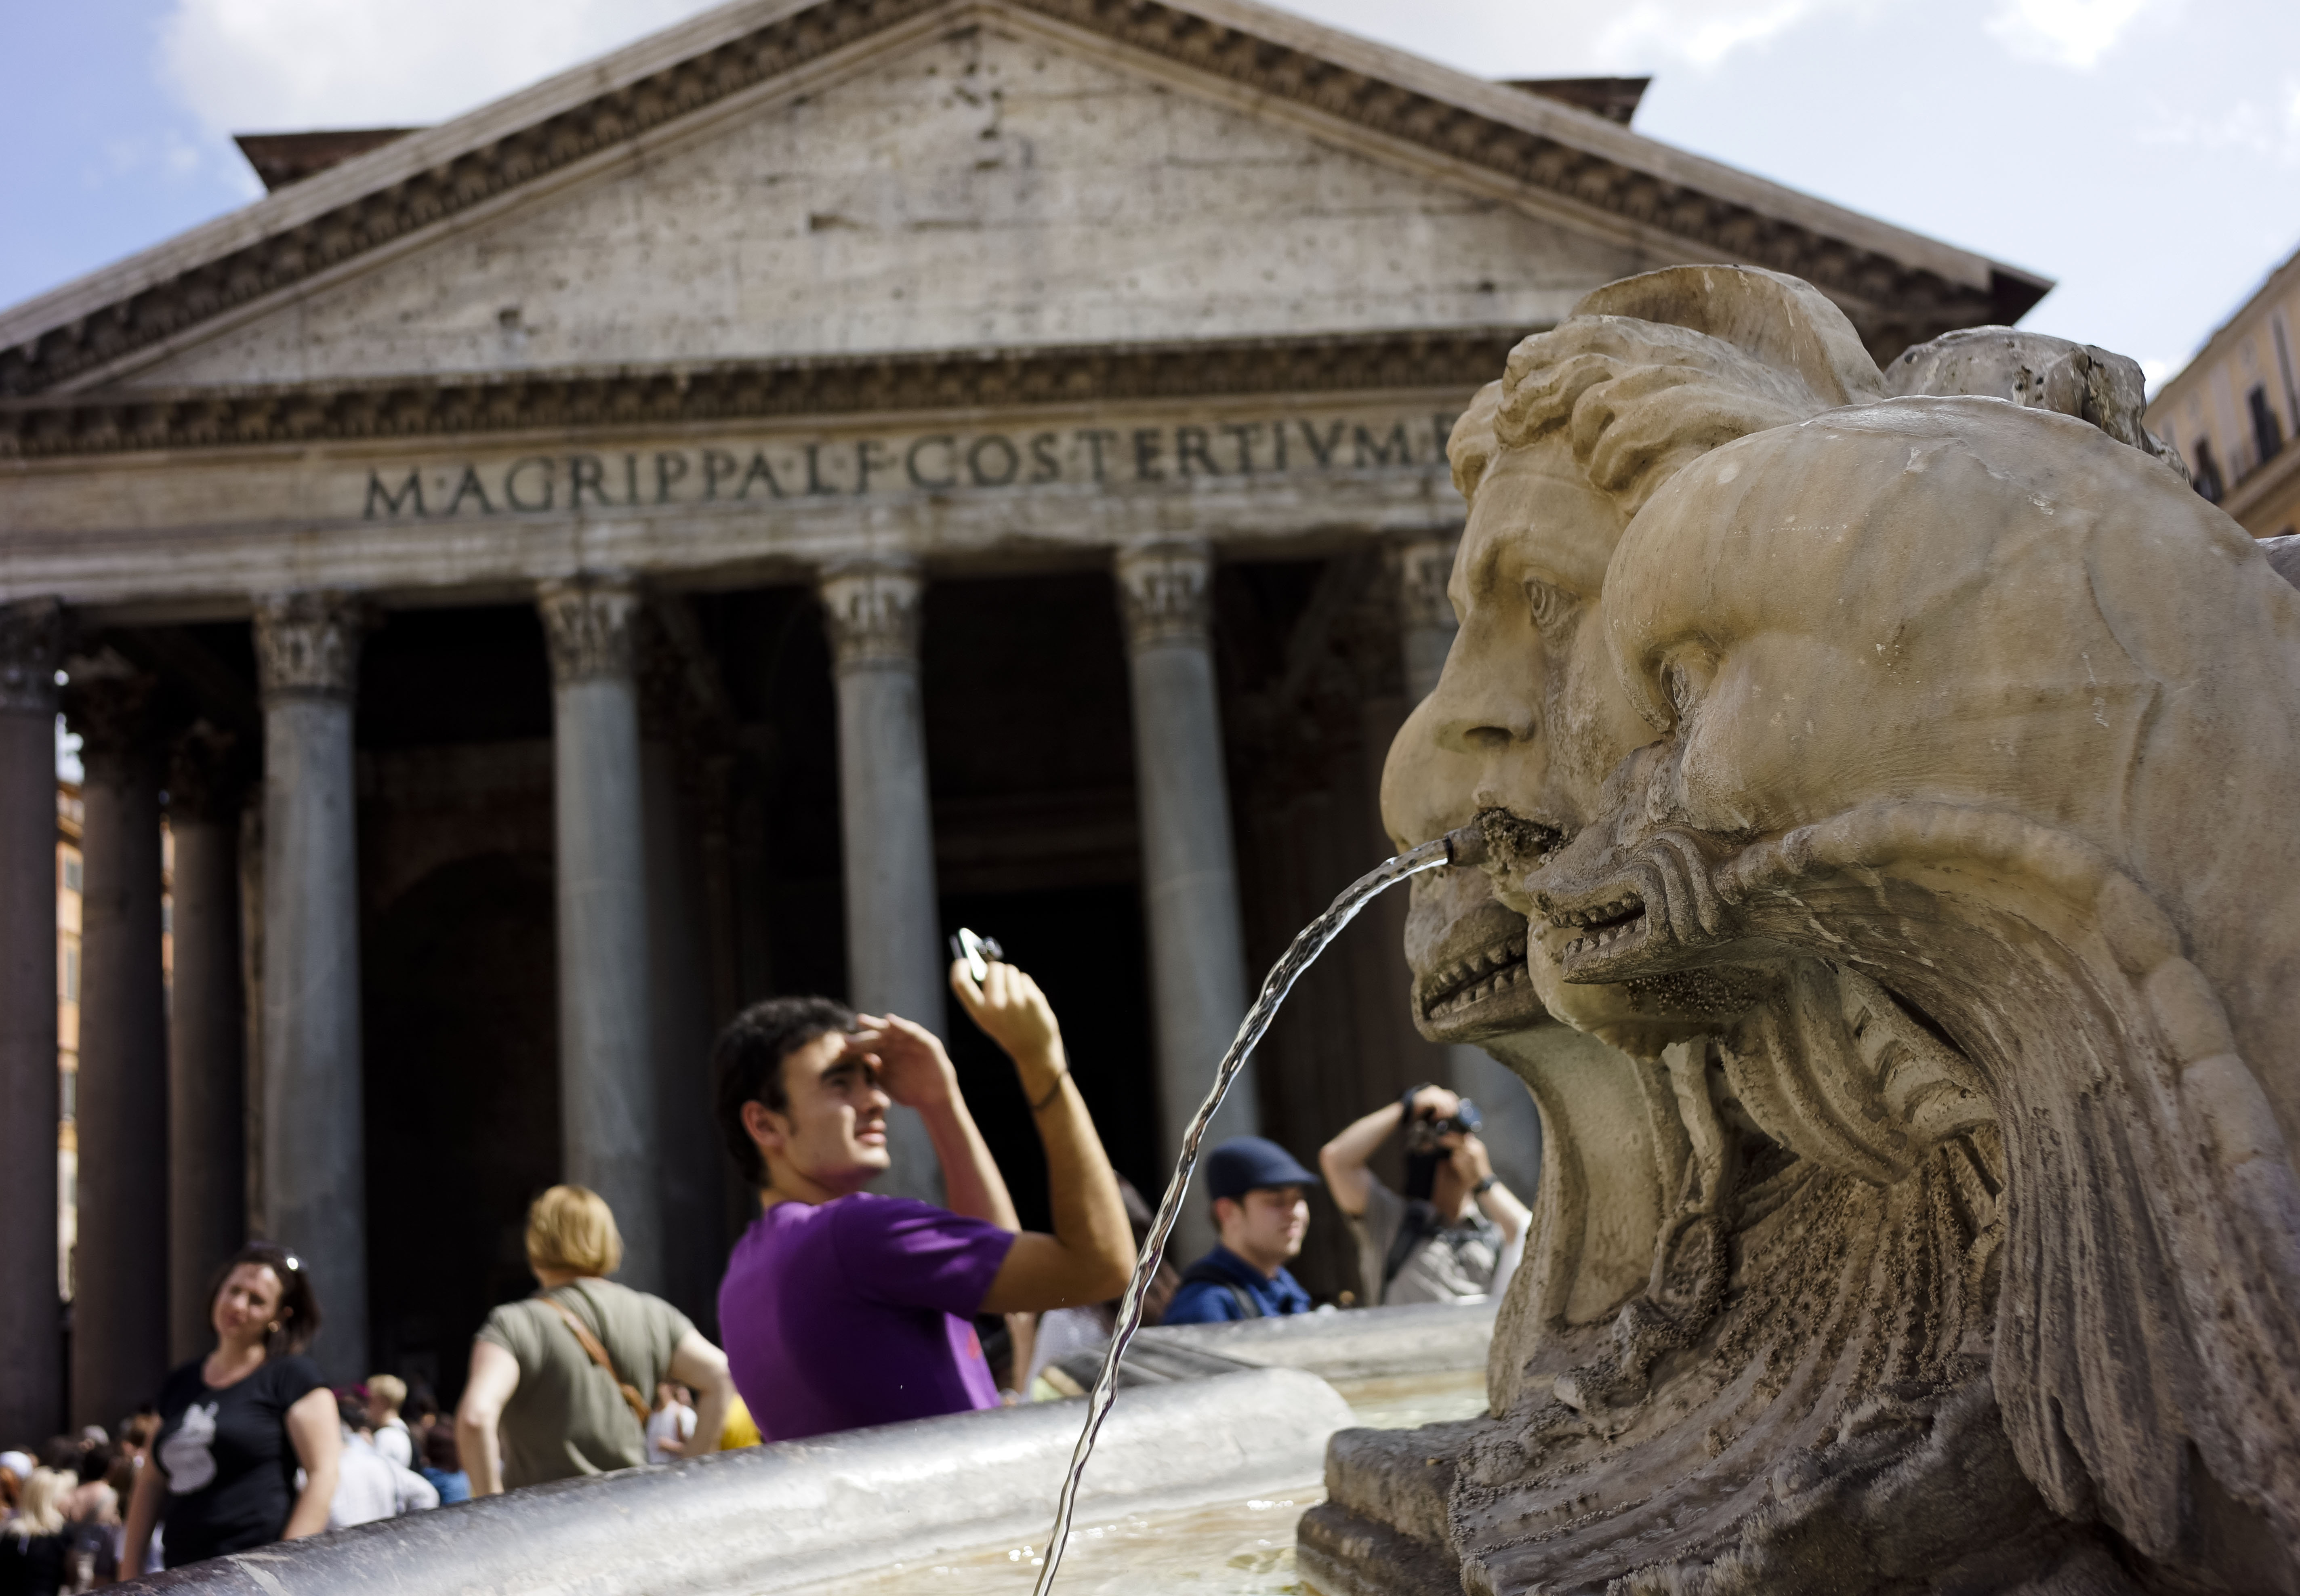 A man is framed by Giacomo Della Porta's 16th century fountain in Piazza della Rotonda, Rome, as he snaps a picture in front of the Pantheon, Friday, June 28, 2013. The Pantheon was built under Emperor Augustus between 27 and 25 b.C., to celebrate all the gods worshipped in Ancient Rome. (AP Photo, Domenico Stinellis)